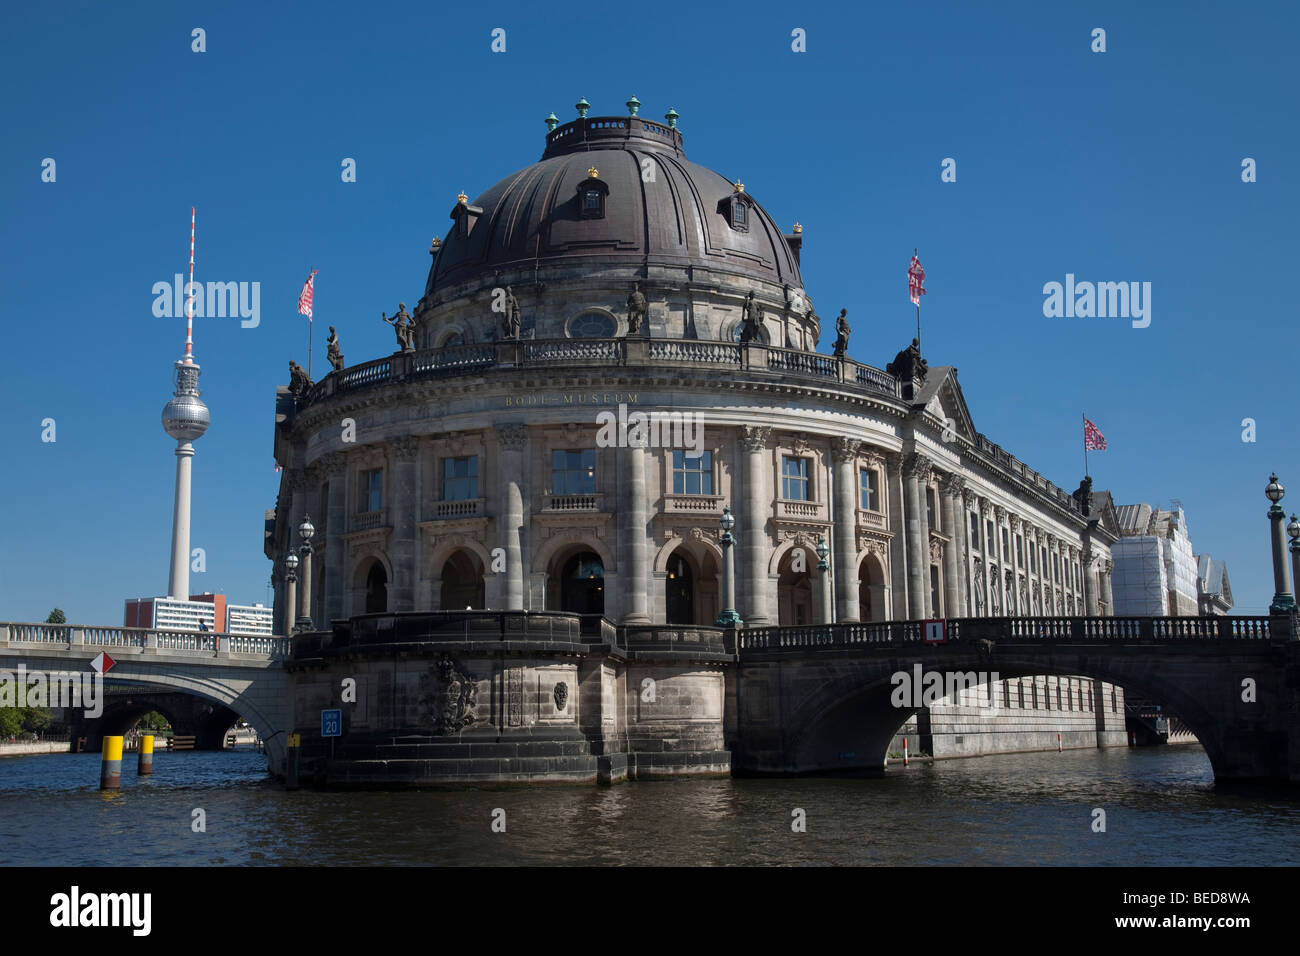 Bodemuseum, on Spree river, Berlin, Germany. with television tower in background Stock Photo